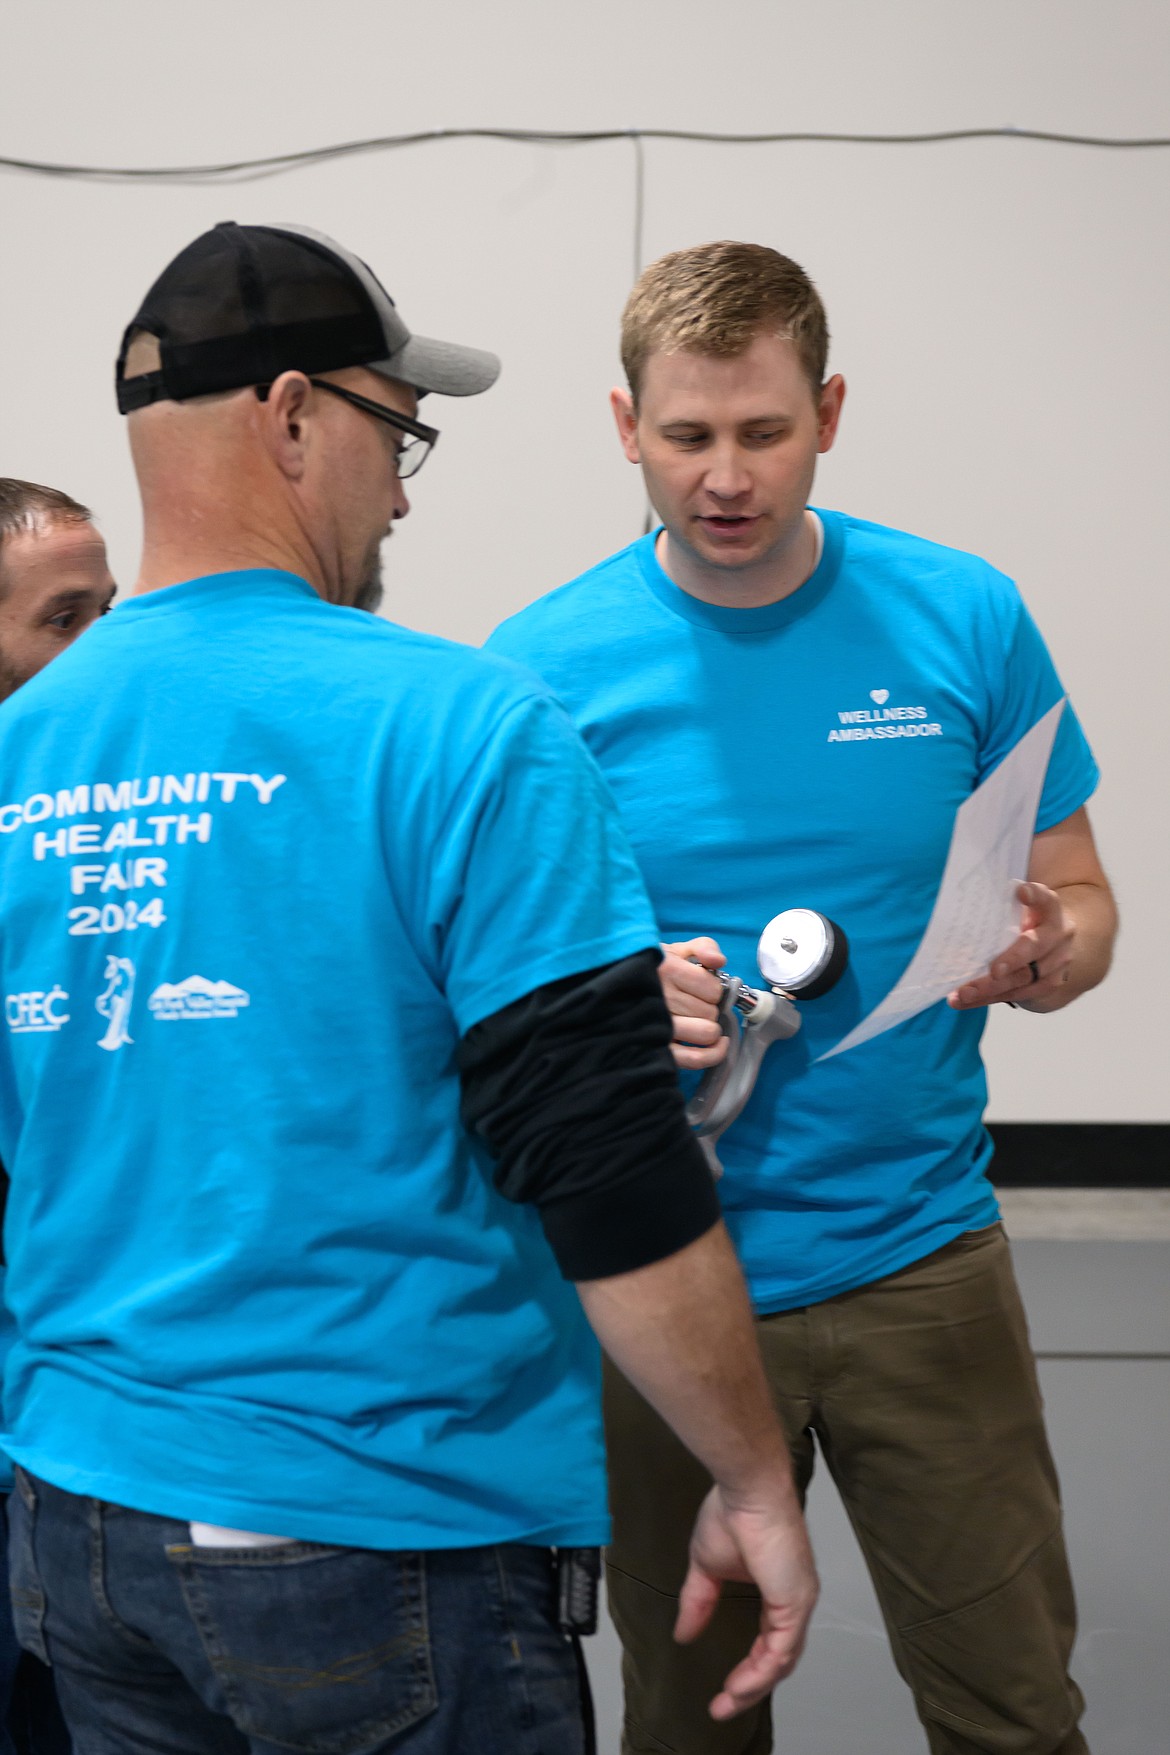 Physical therapist Brandon Fowler demonstrates techniques used for patient rehabilitation at the health fair in Plains. (Tracy Scott/Valley Press)